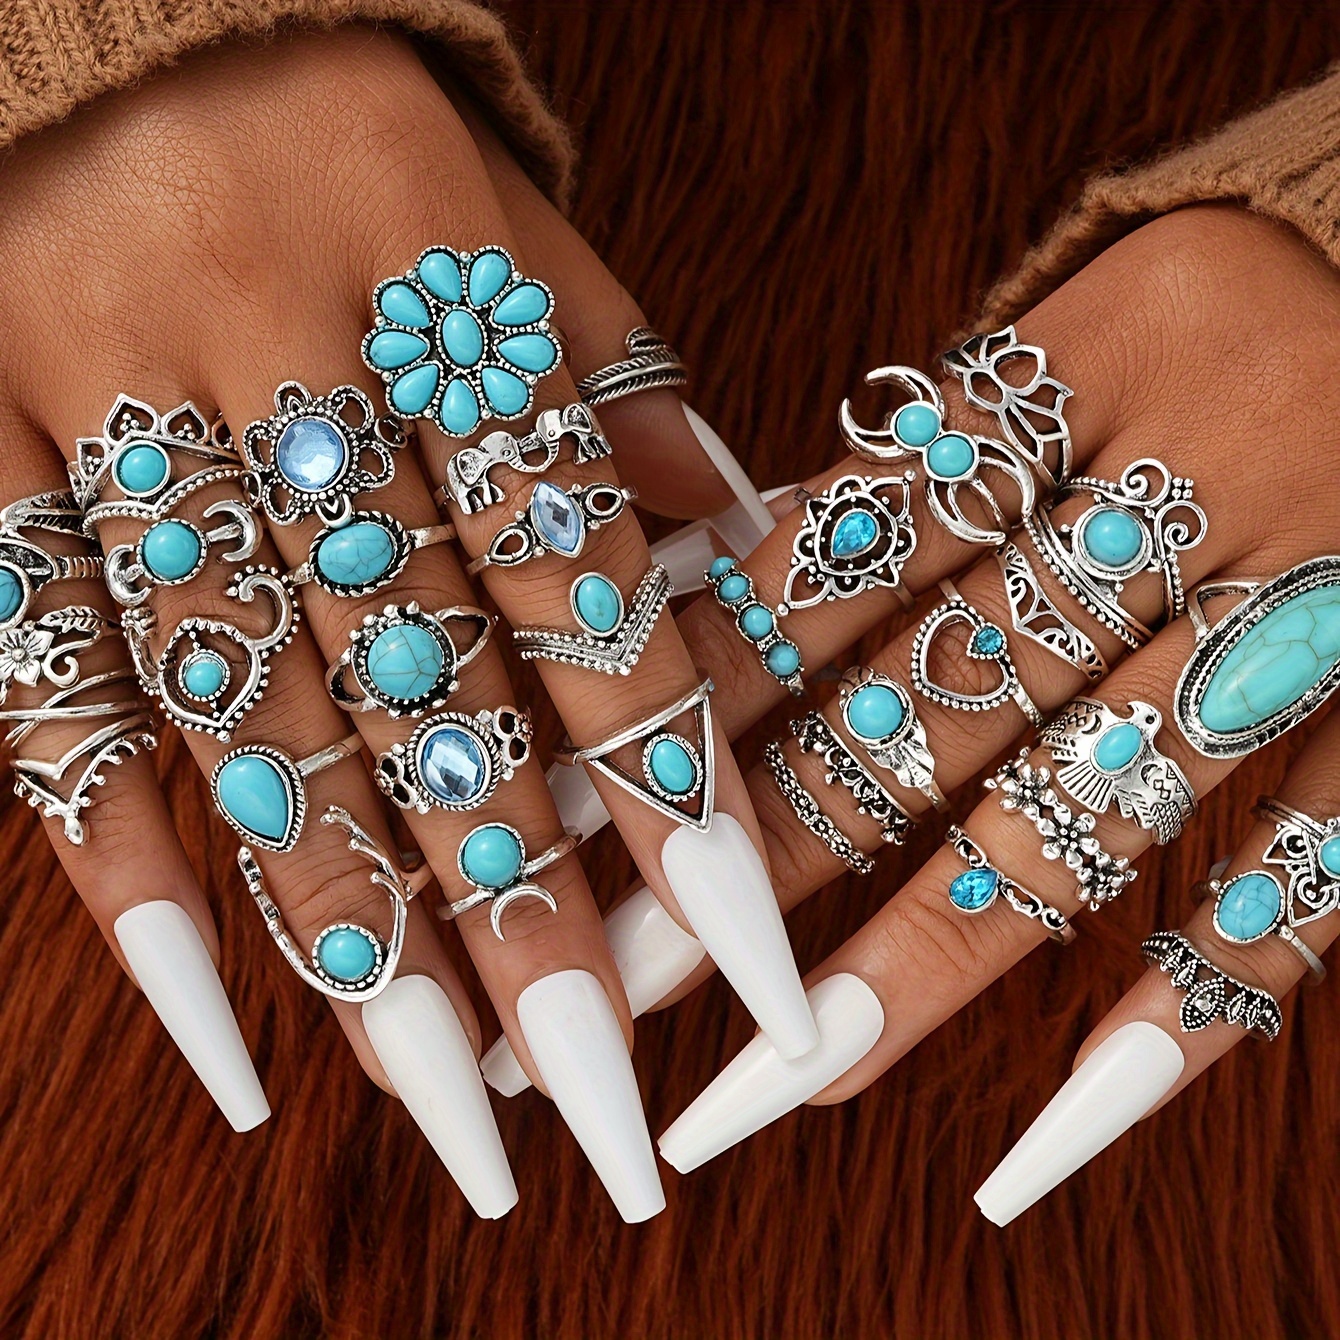 

44-piece Boho Ring Set - Zinc Alloy, Perfect For Daily Wear & Parties Turquoise Jewelry Set